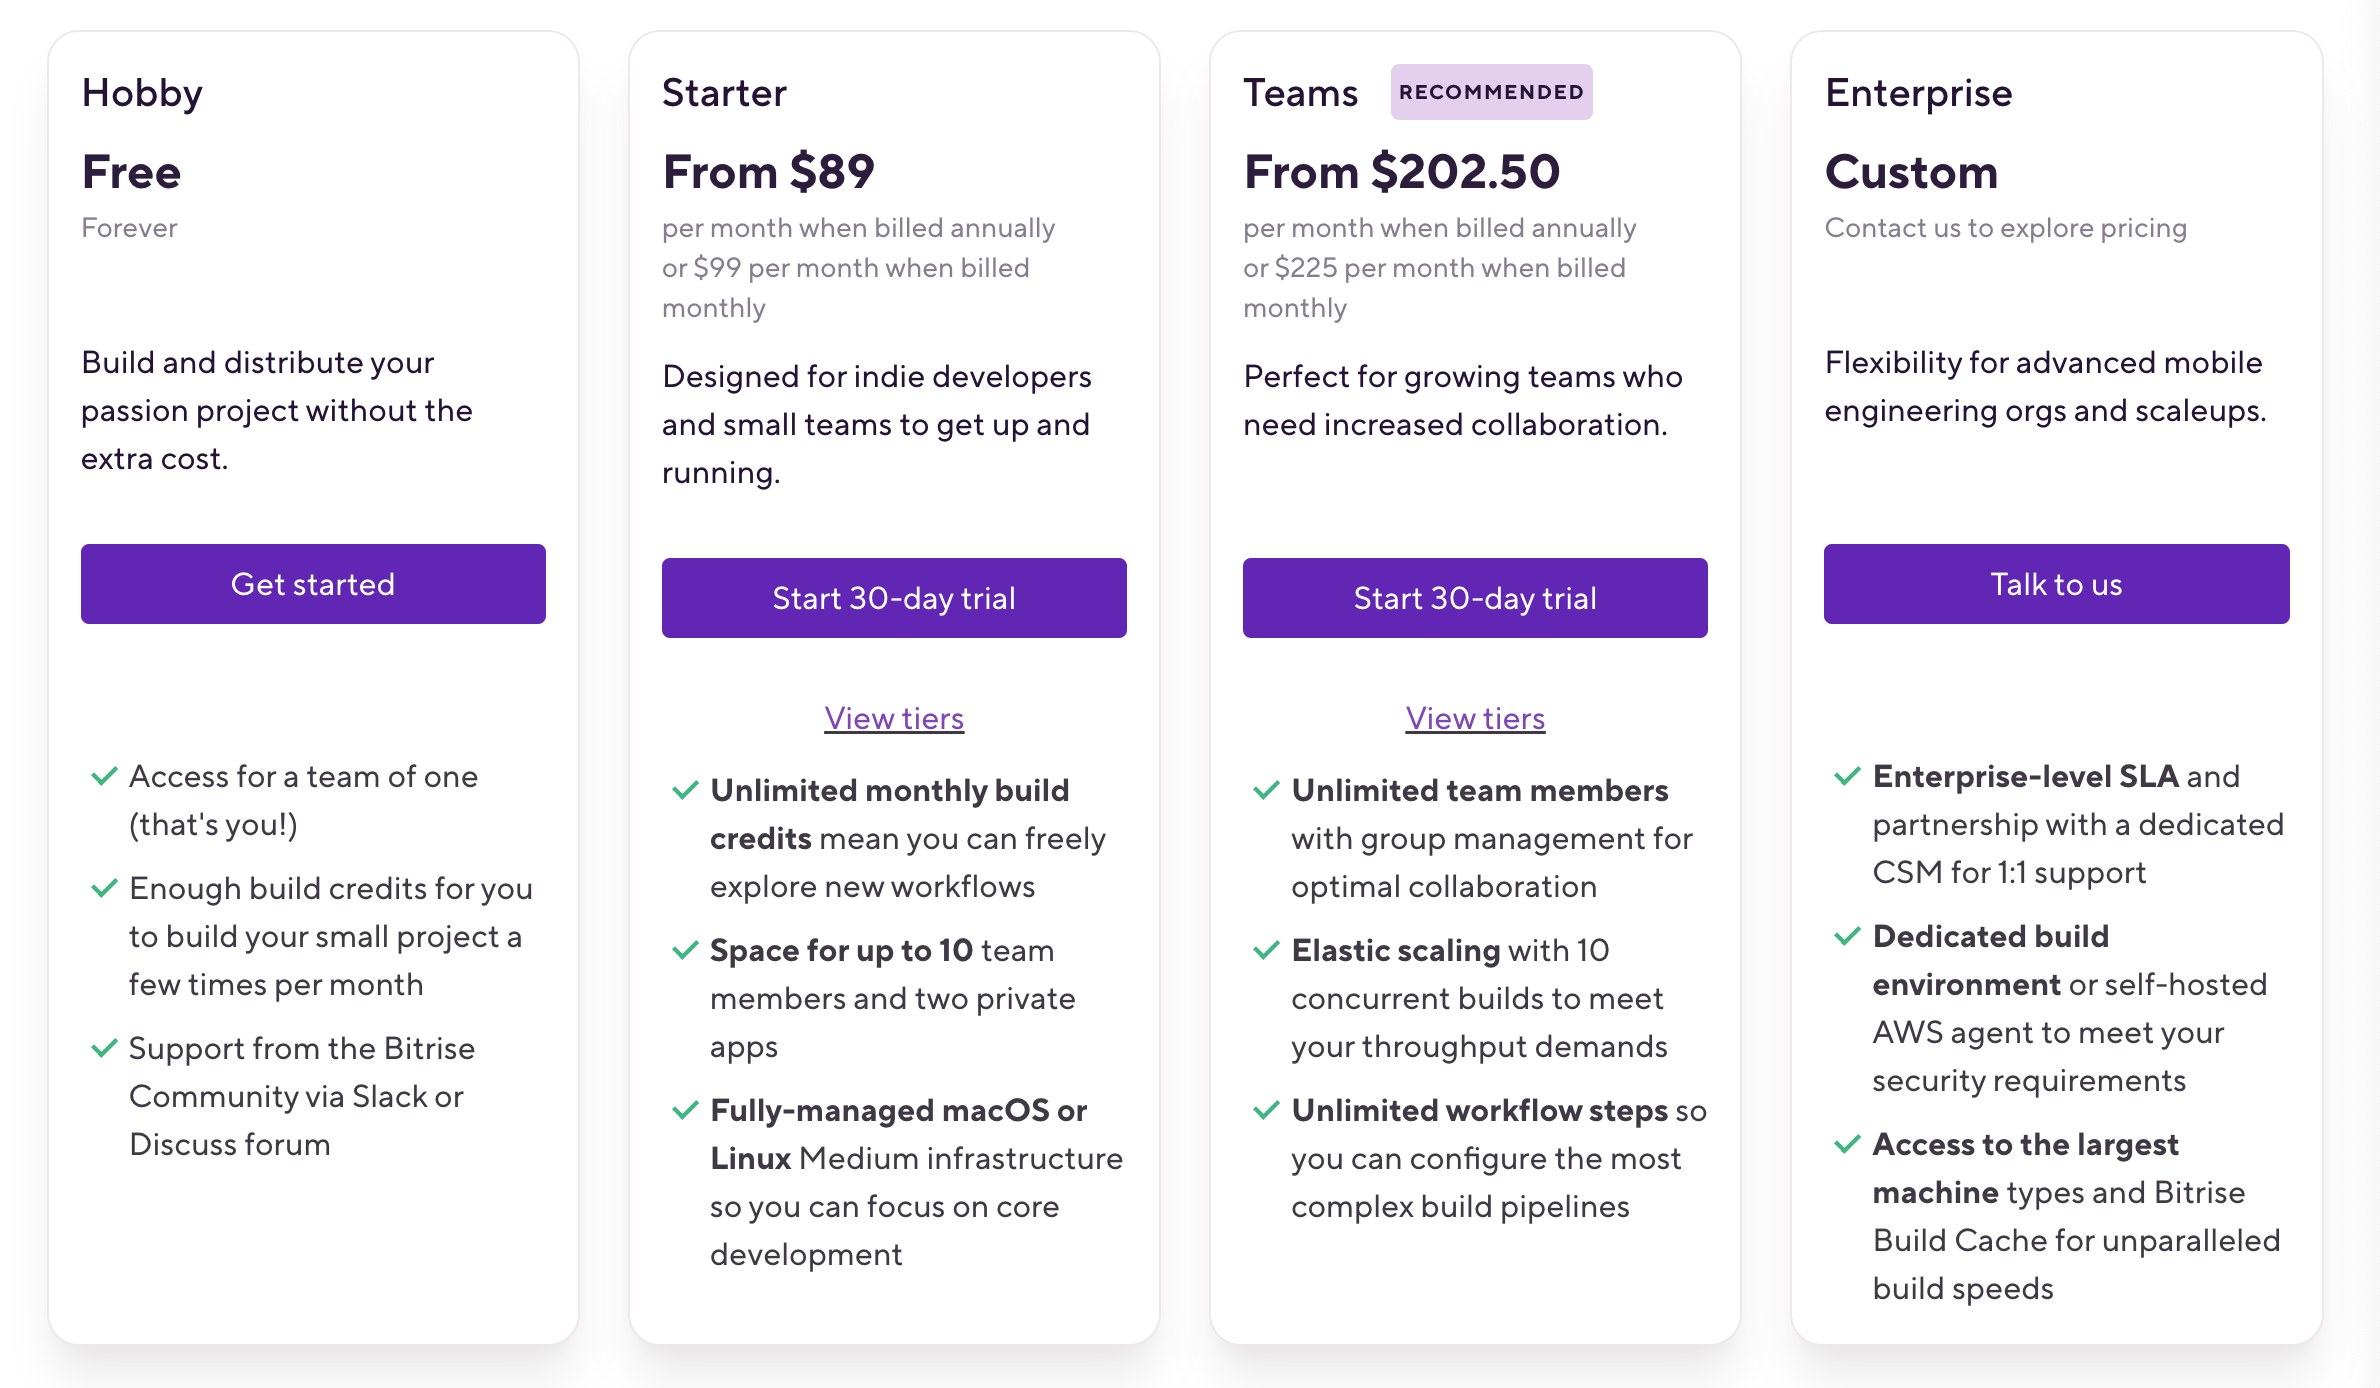 Screenshot of pricing tiers, including hobby for free, starter at $89/month, Teams at $202.50/month, and customer enterprise plans